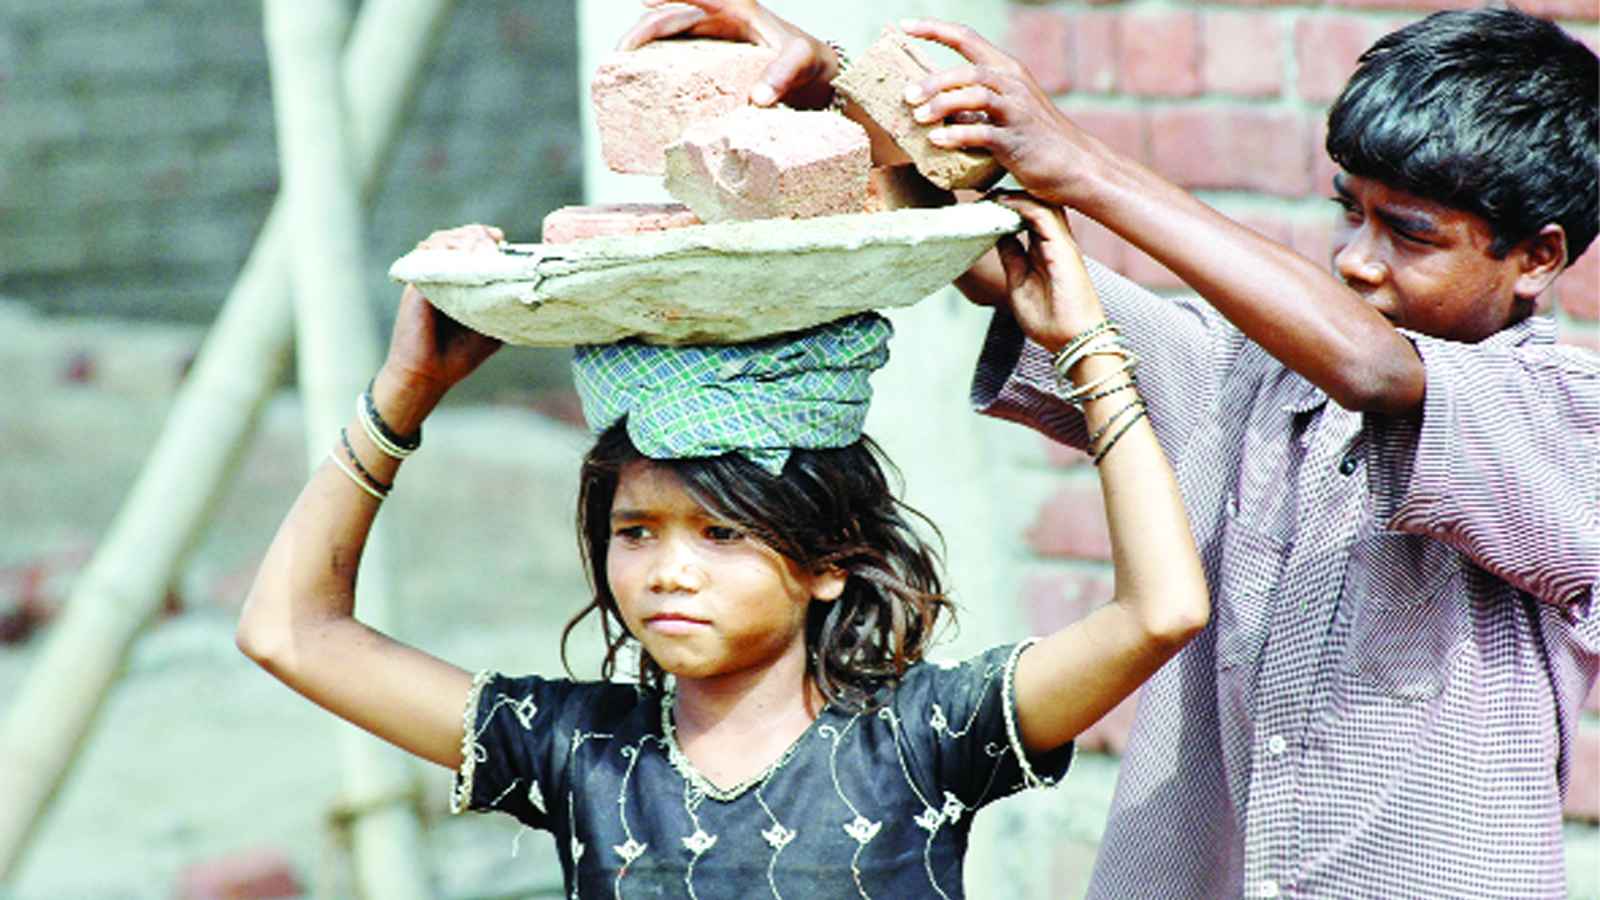 Child Labor Day 2023: Date, History, Facts about Child Labor